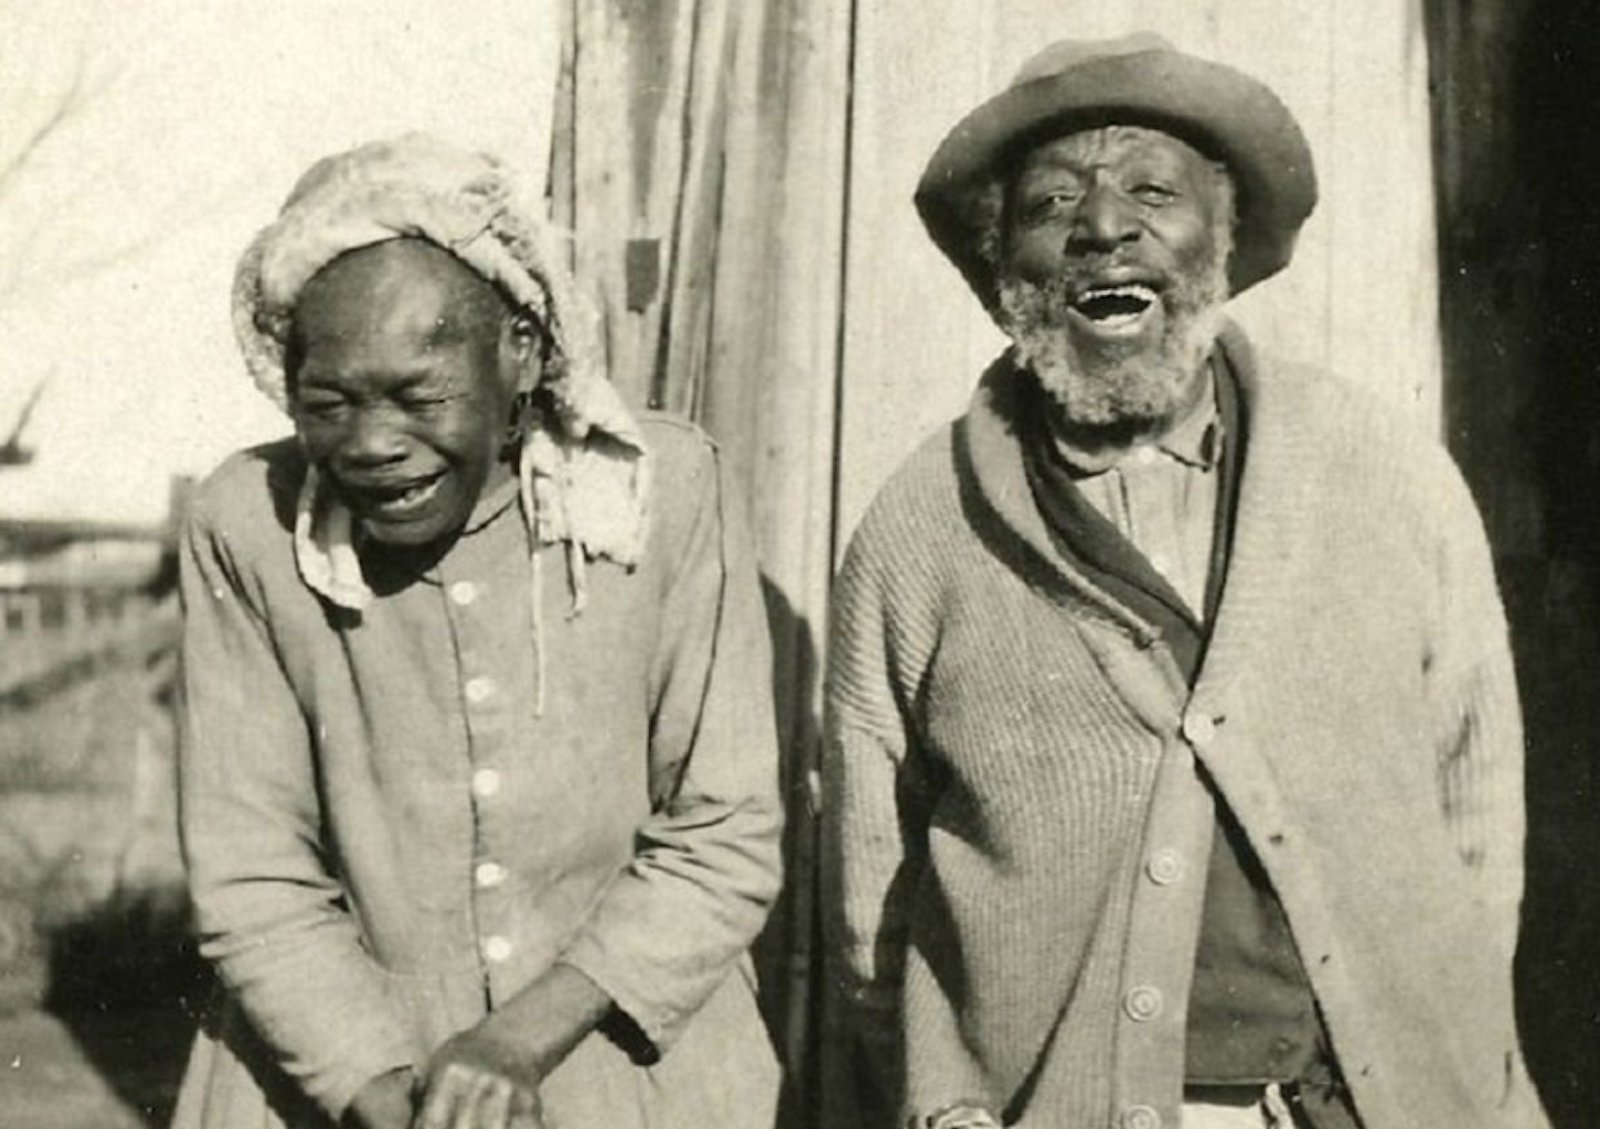 The enslaved black people of the 1960s who did not know slavery had ended | Face2Face Africa